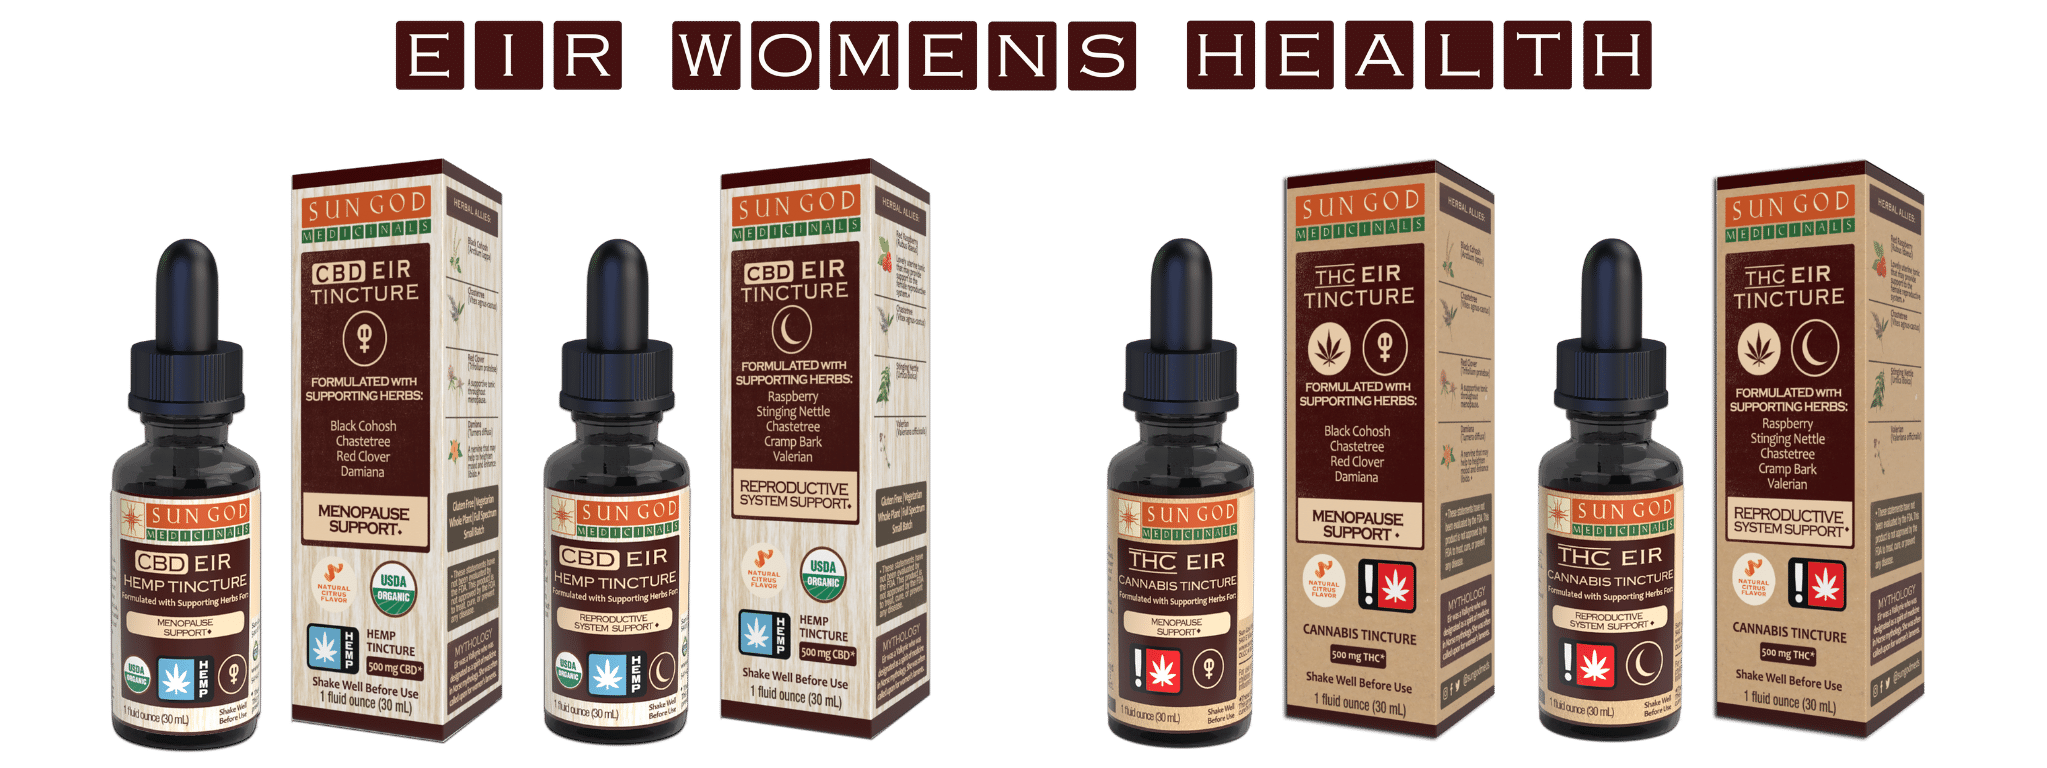 Herbal Products For Women's Health - by Sun God Medicinals